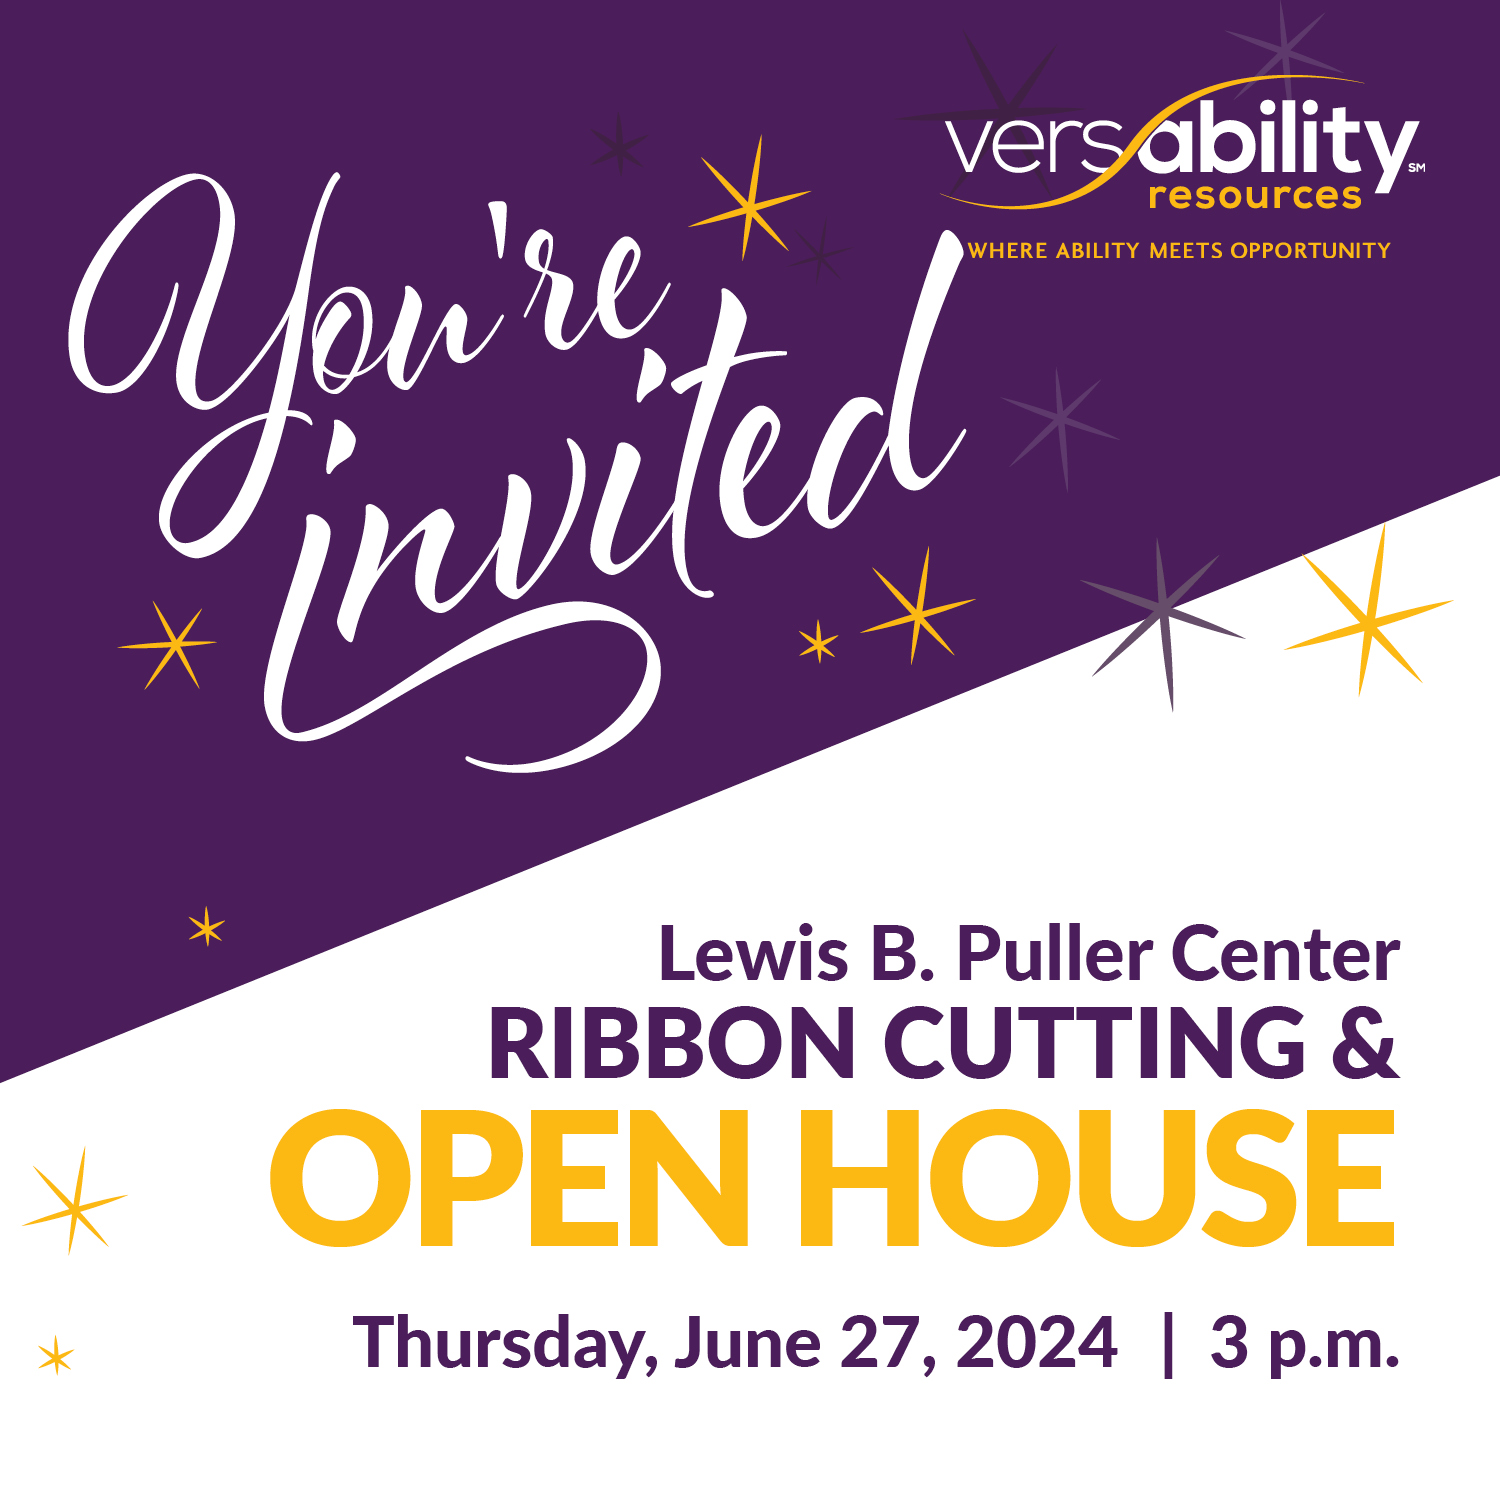 VersAbility Resources to Host Ribbon Cutting Open House of New Puller Center Location in Gloucester